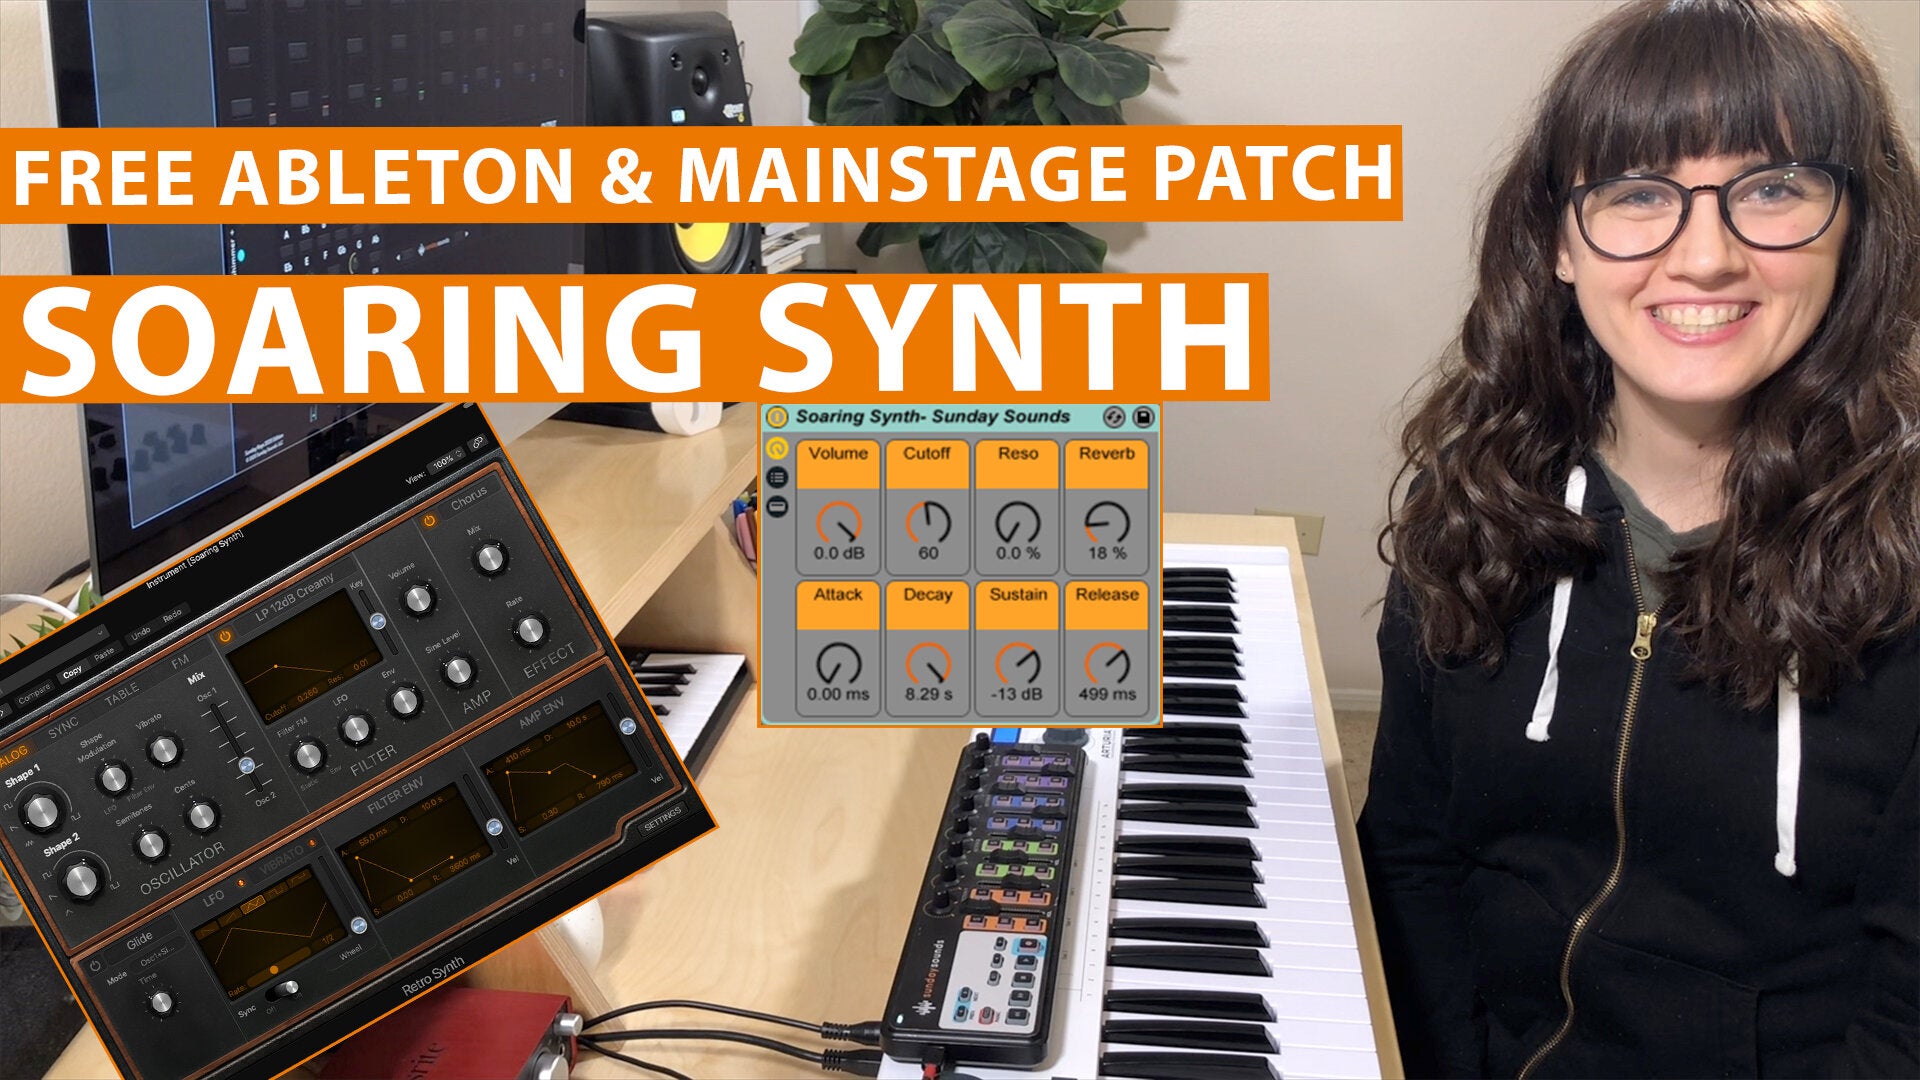 Free MainStage & Ableton Worship Patch! - Soaring Synth